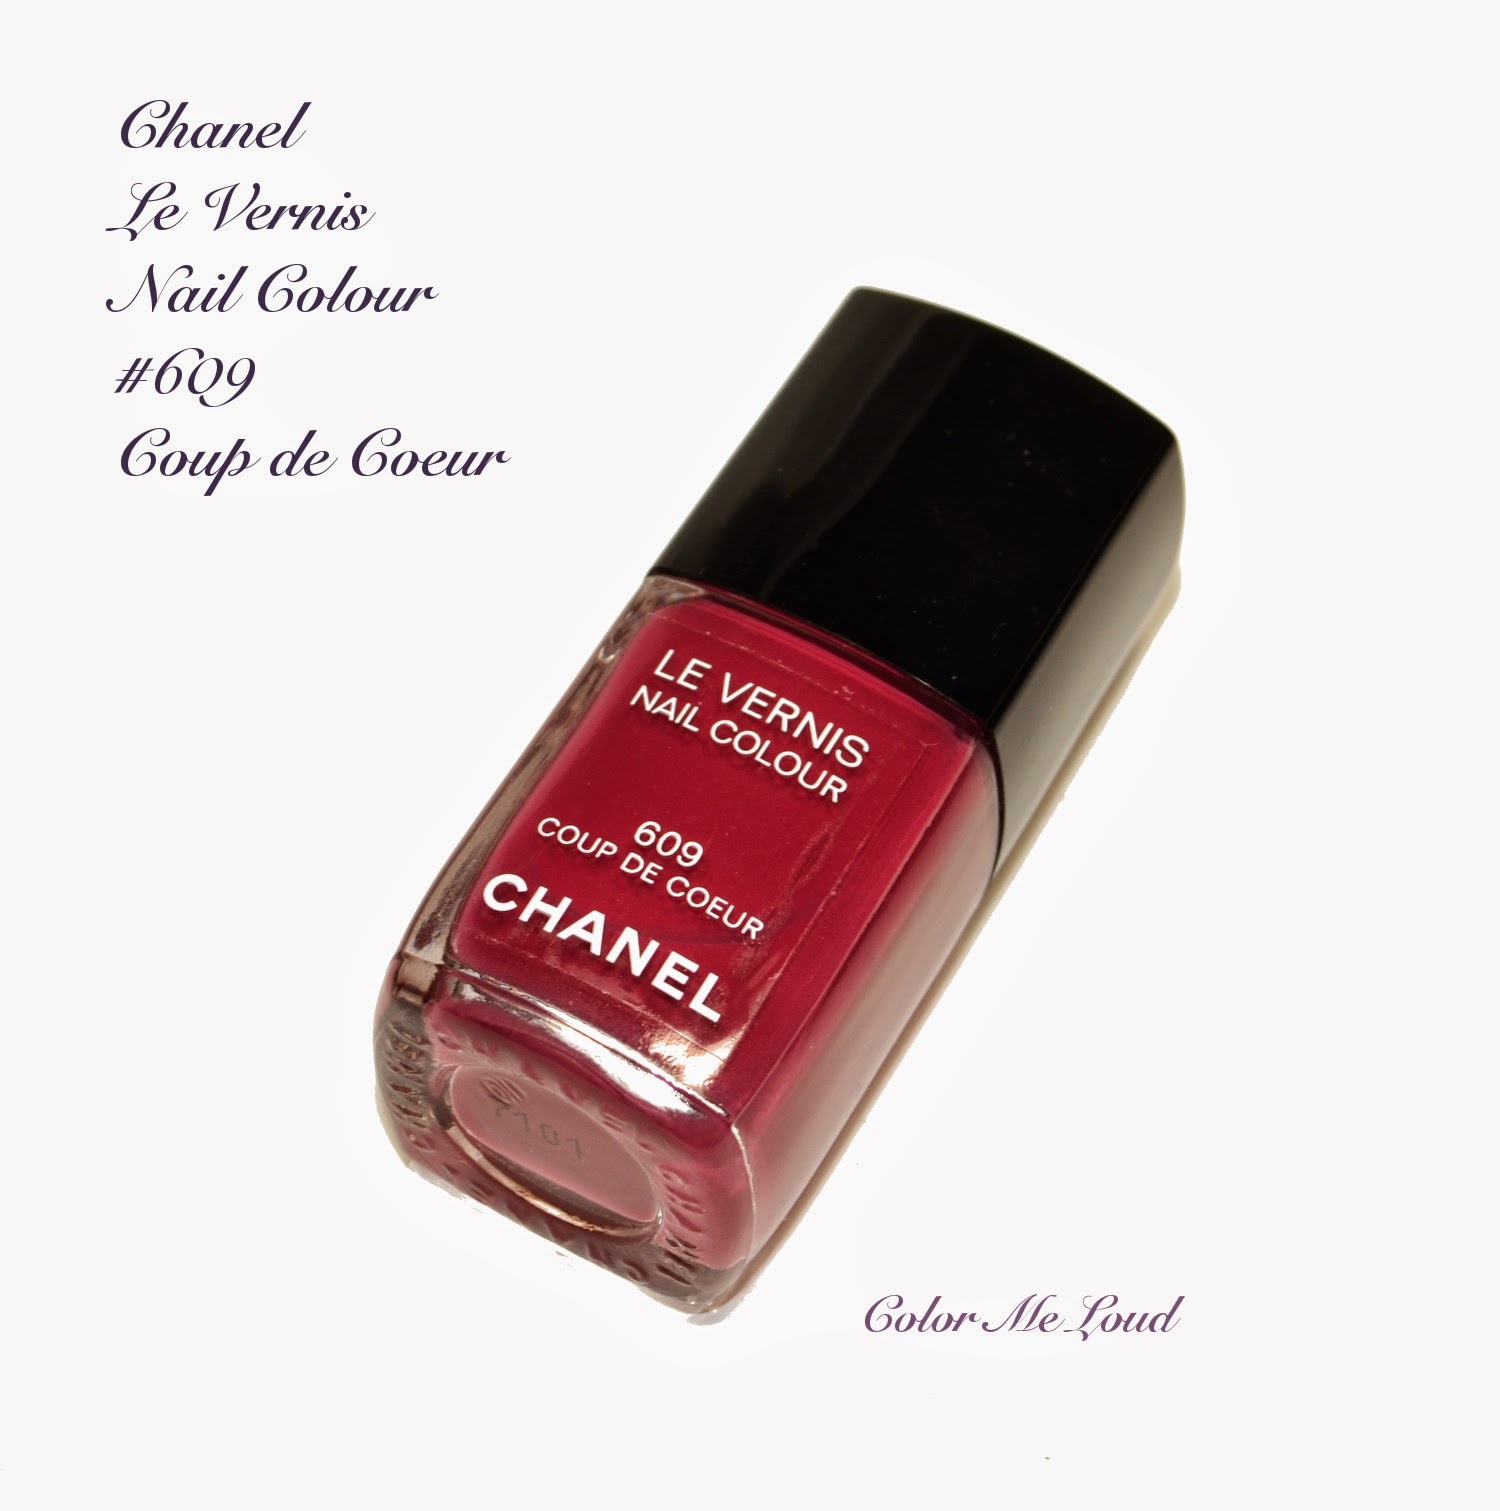 Chanel Le Vernis #609 Coup de Coeur Nail Polish from Variations Collection for Spring 2014, Swatch & Comparisons